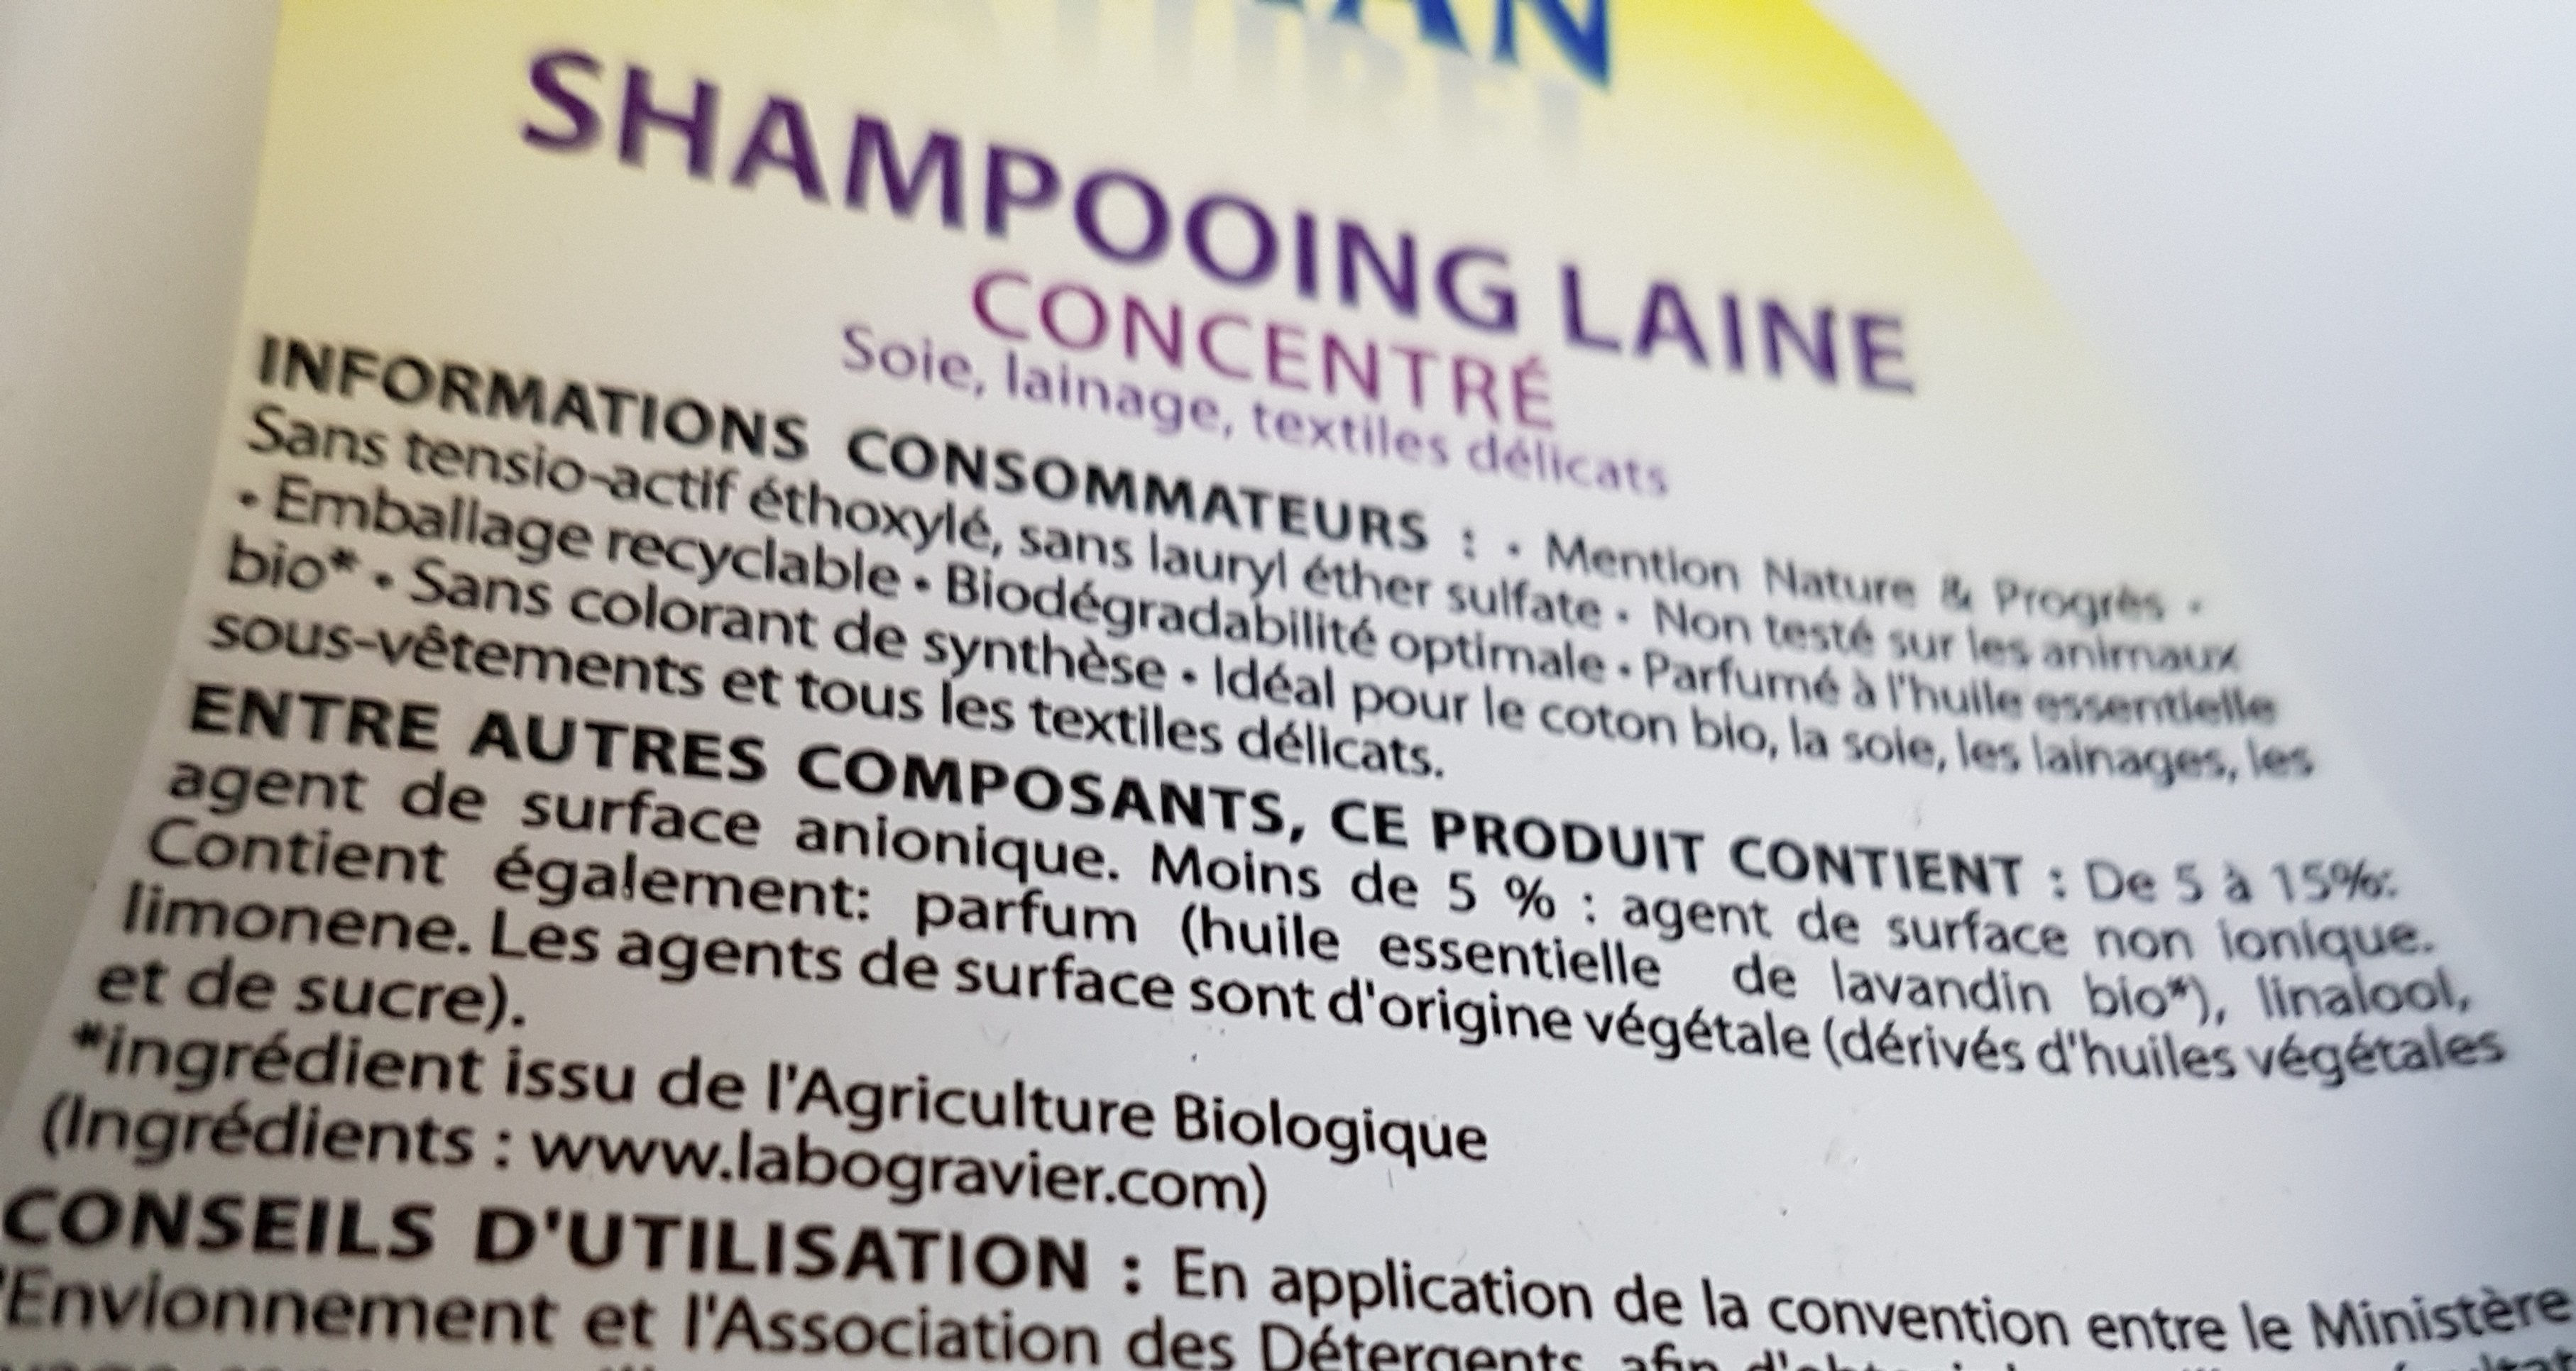 shampooing laine - Ingredients - fr